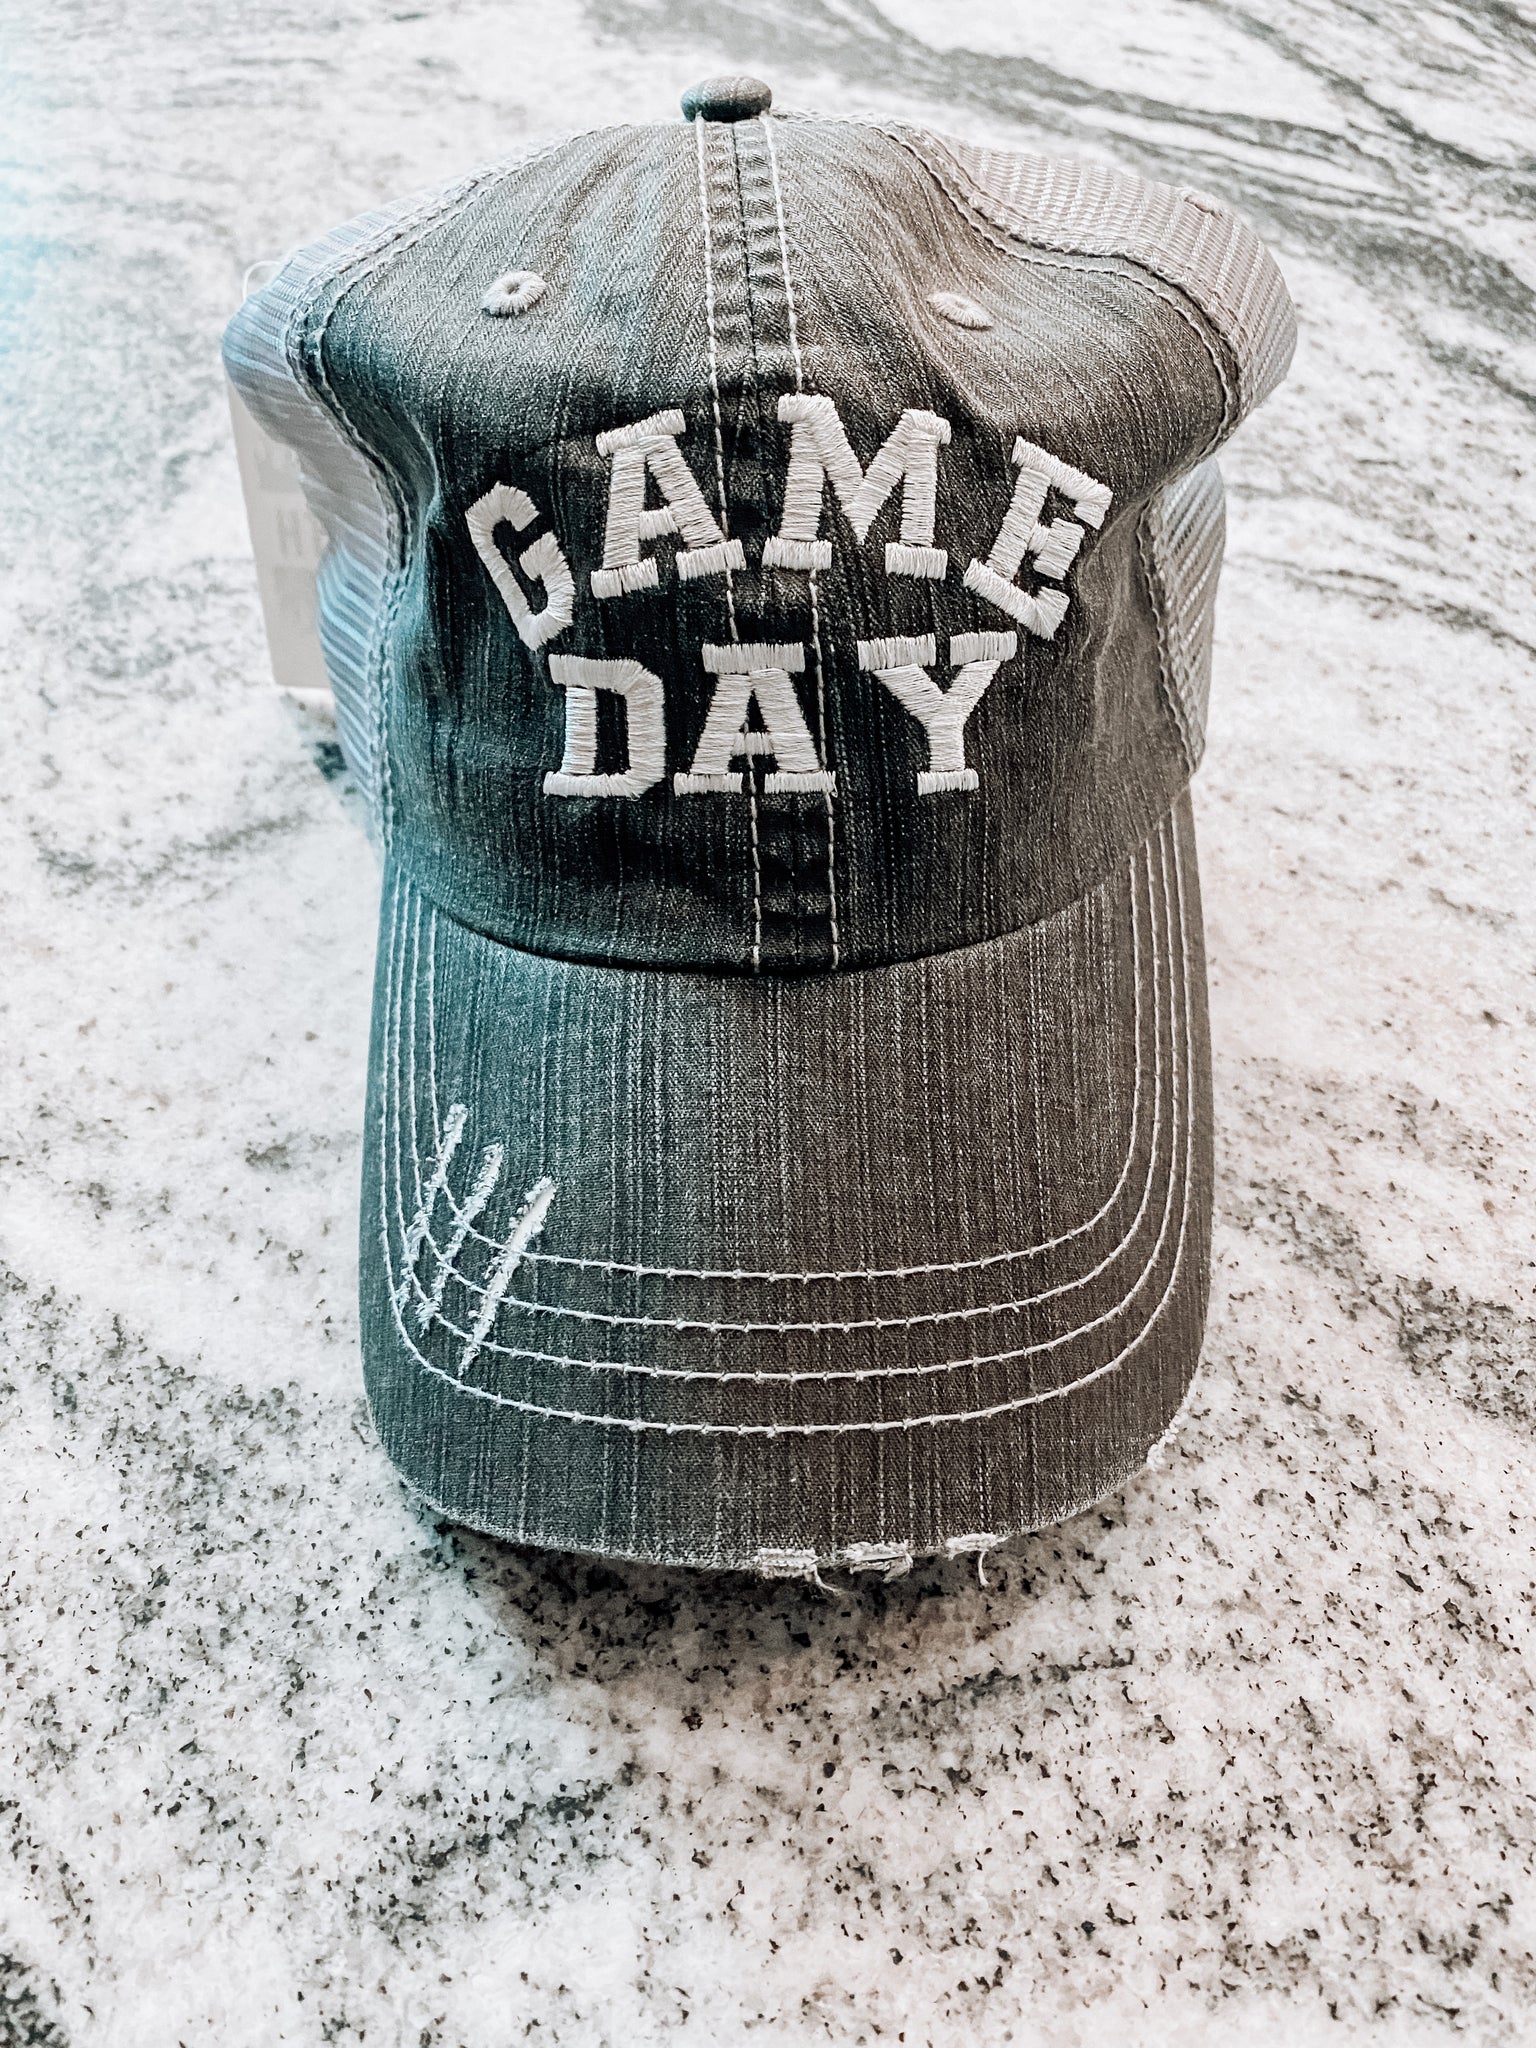 GAME DAY HAT